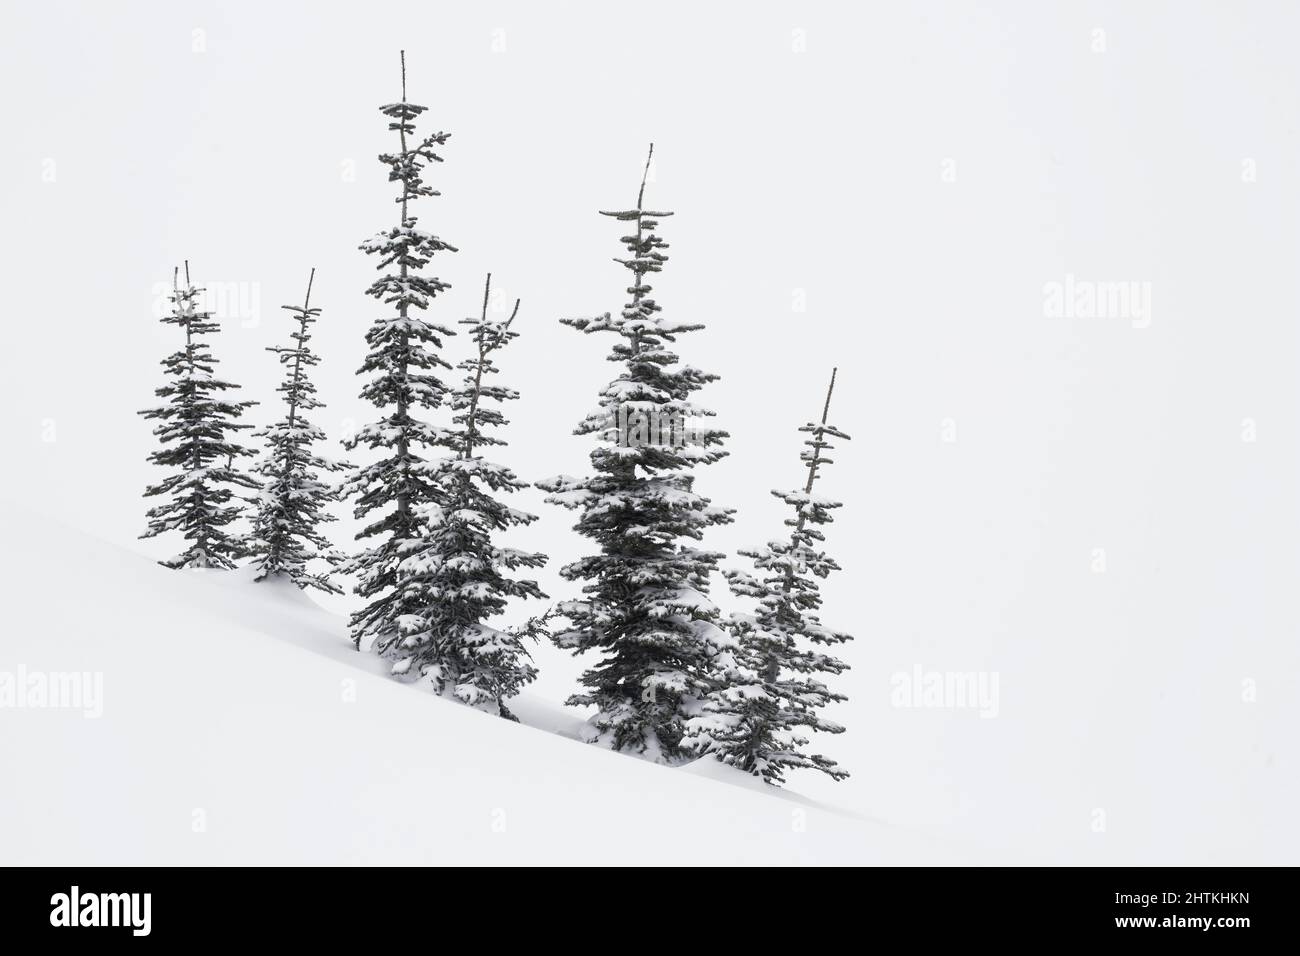 Snow-covered evergreen trees on a slope in winter Stock Photo